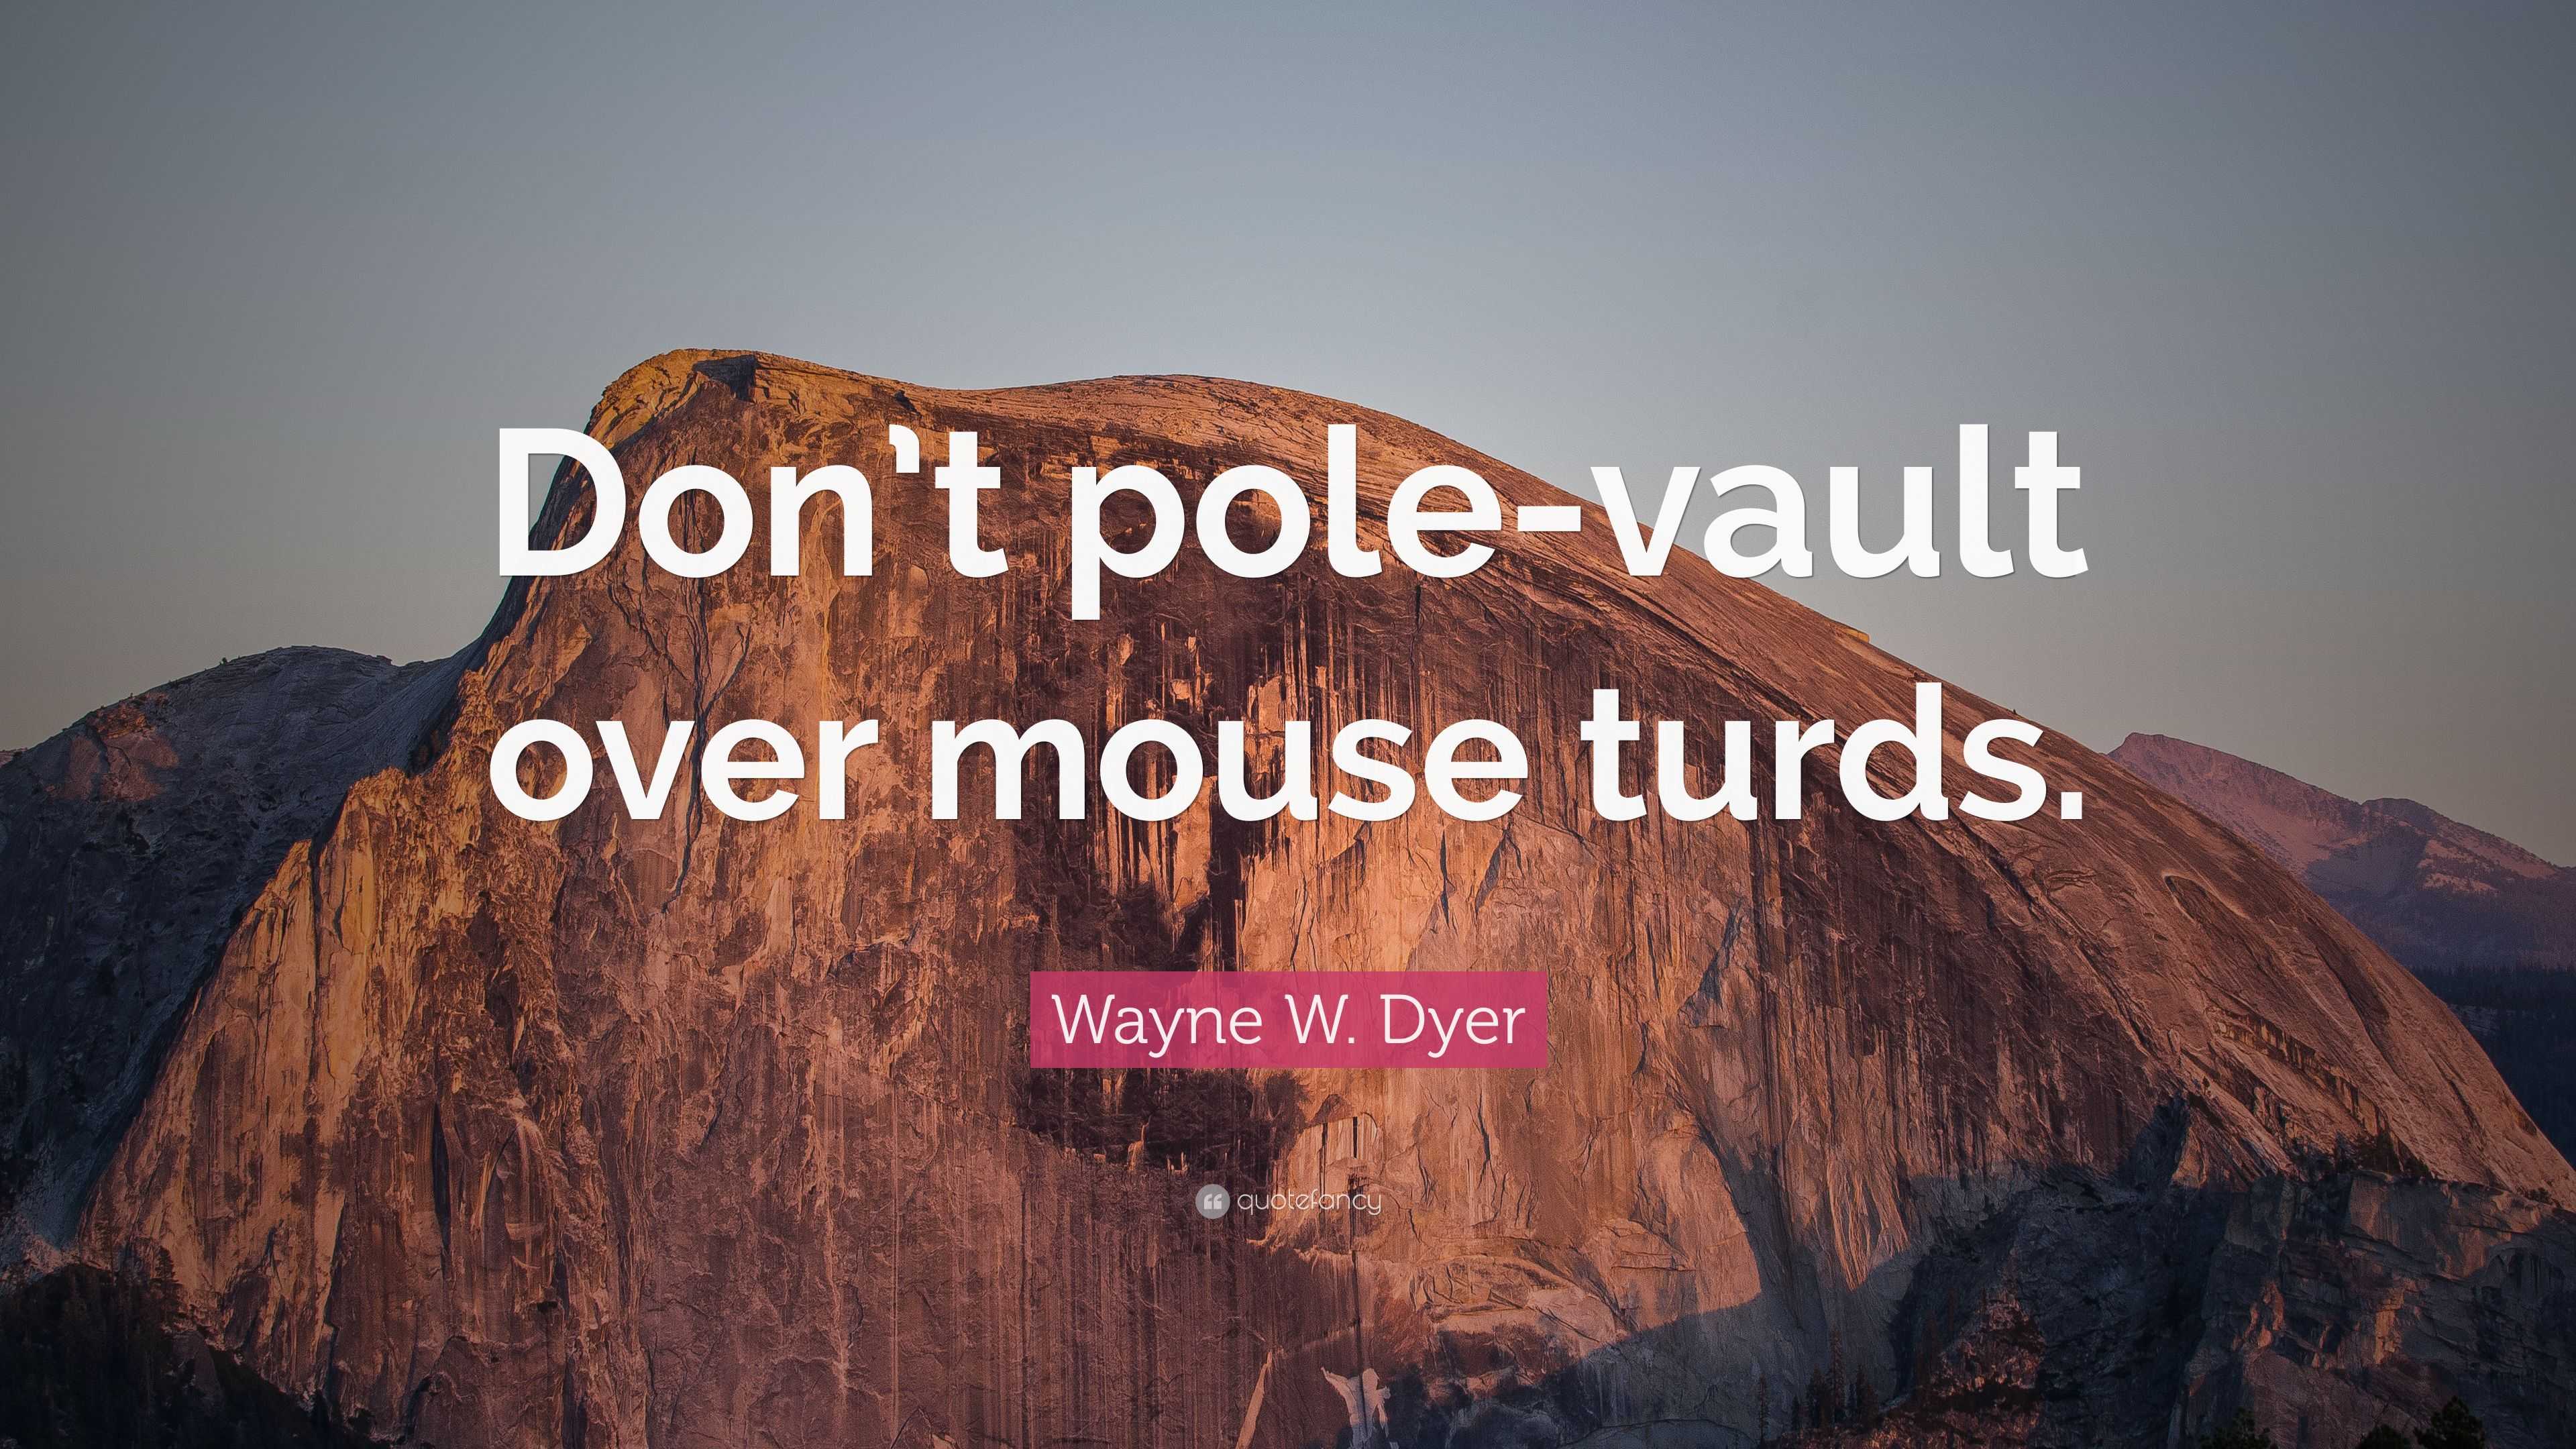 Wayne W. Dyer Quote: “Don’t pole-vault over mouse turds.” (10